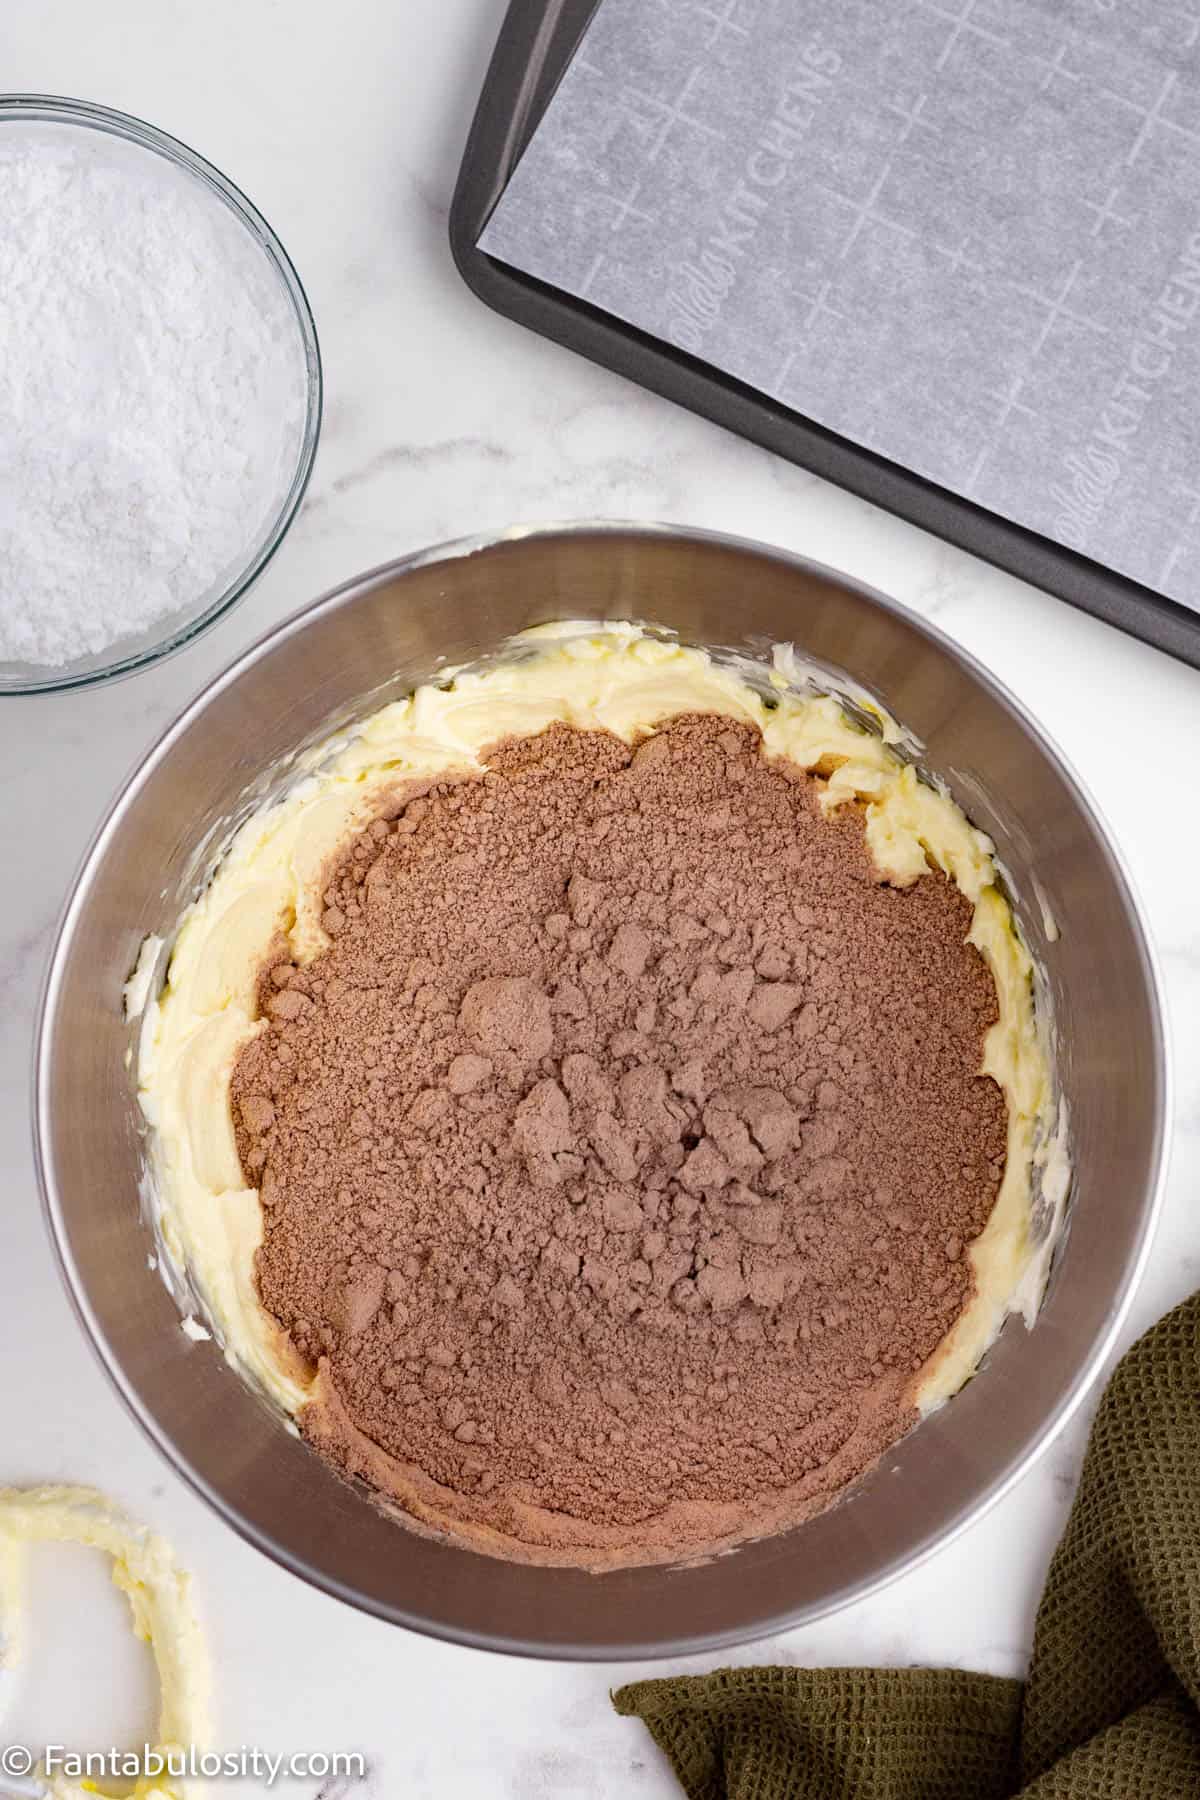 A boxed chocolate cake mix has been added to a light yellow creamy mixture in a large metal mixing bowl